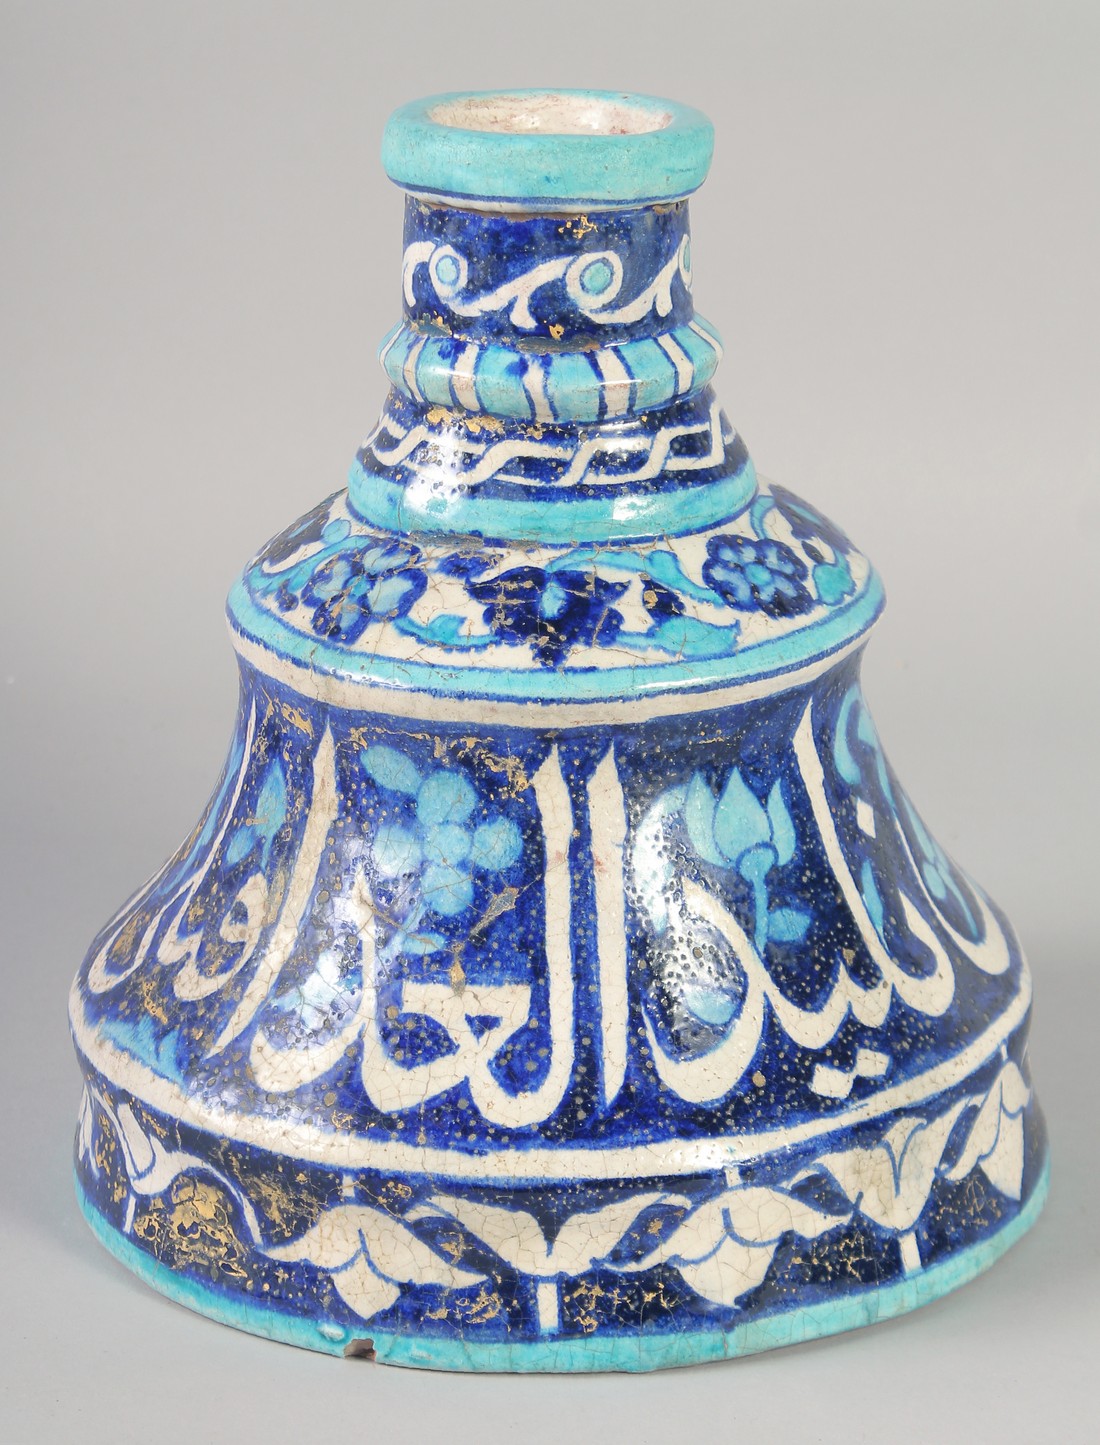 A VERY UNUSUAL LARGE 19TH CENTURY INDIAN MULTAN IZNIK STYLE GLAZED POTTERY CANDLESTICK, with a